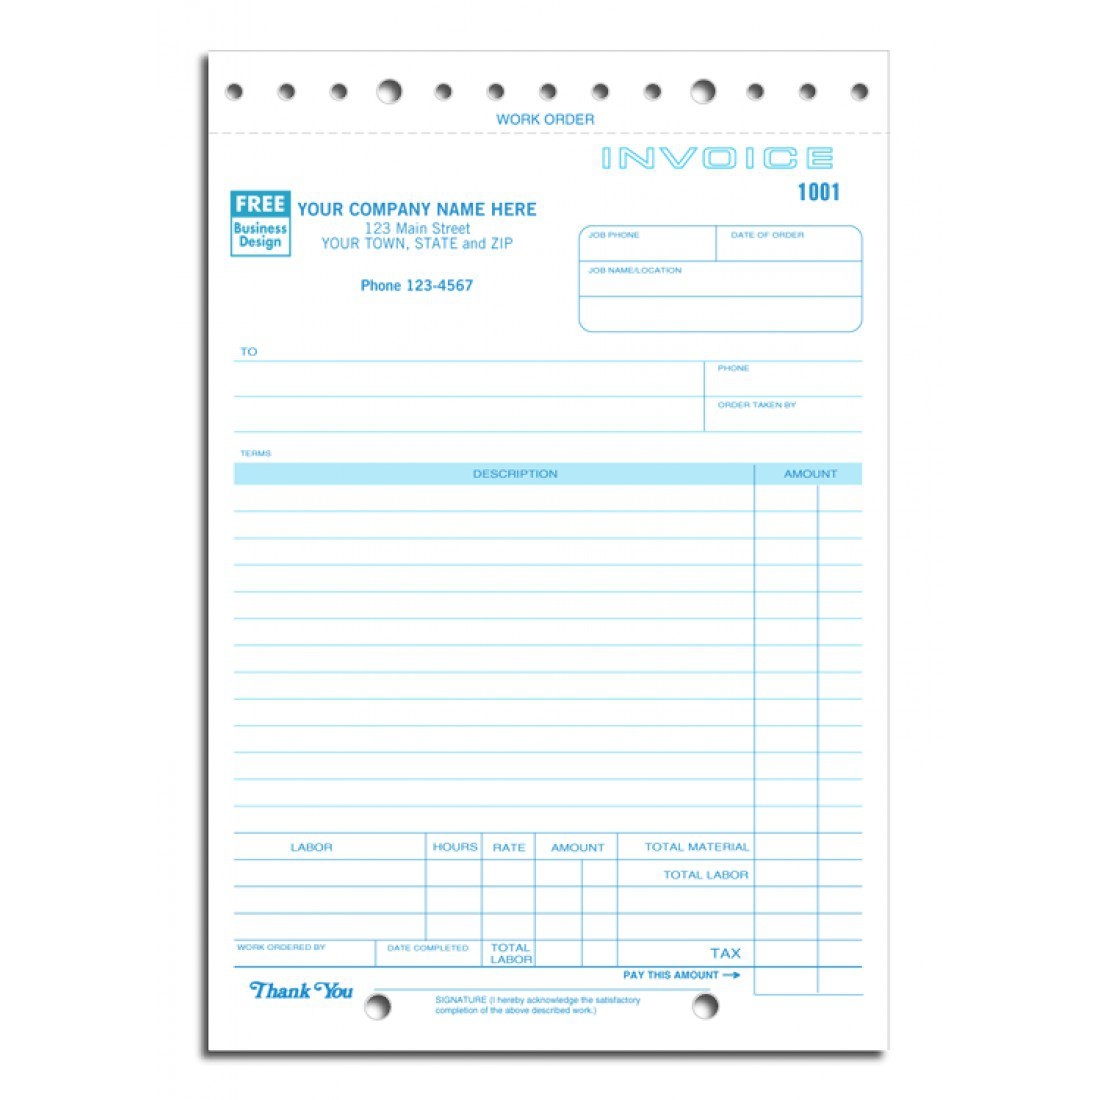 invoice forms custom business invoice forms business order forms carbon copy invoices